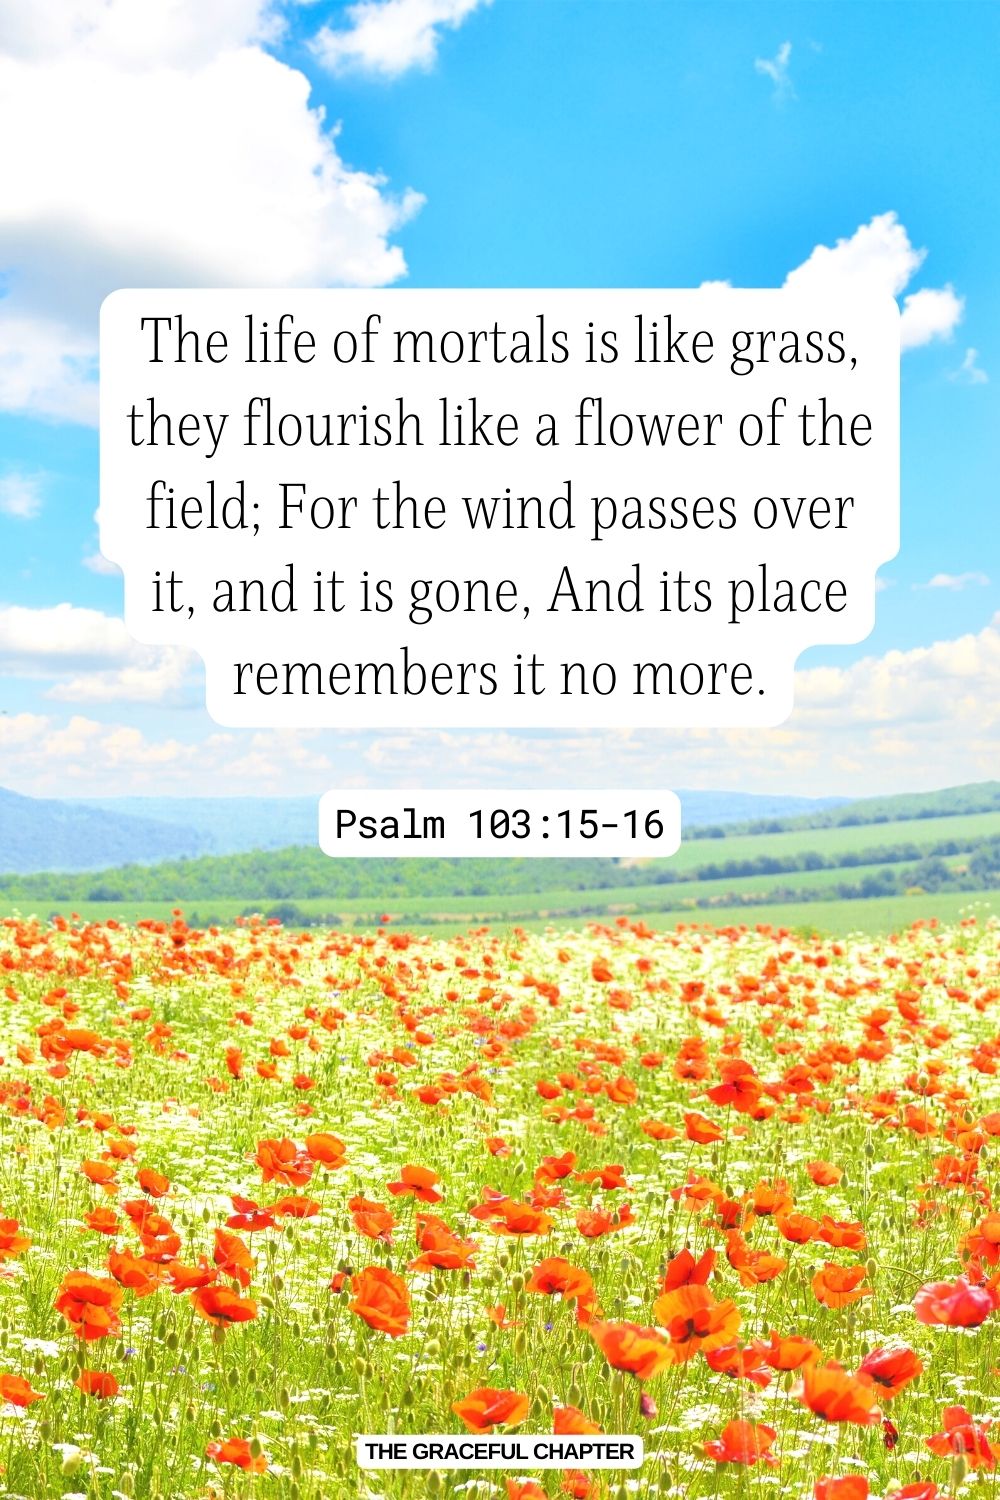 The life of mortals is like grass, they flourish like a flower of the field; For the wind passes over it, and it is gone, And its place remembers it no more. Psalm 103:15-16